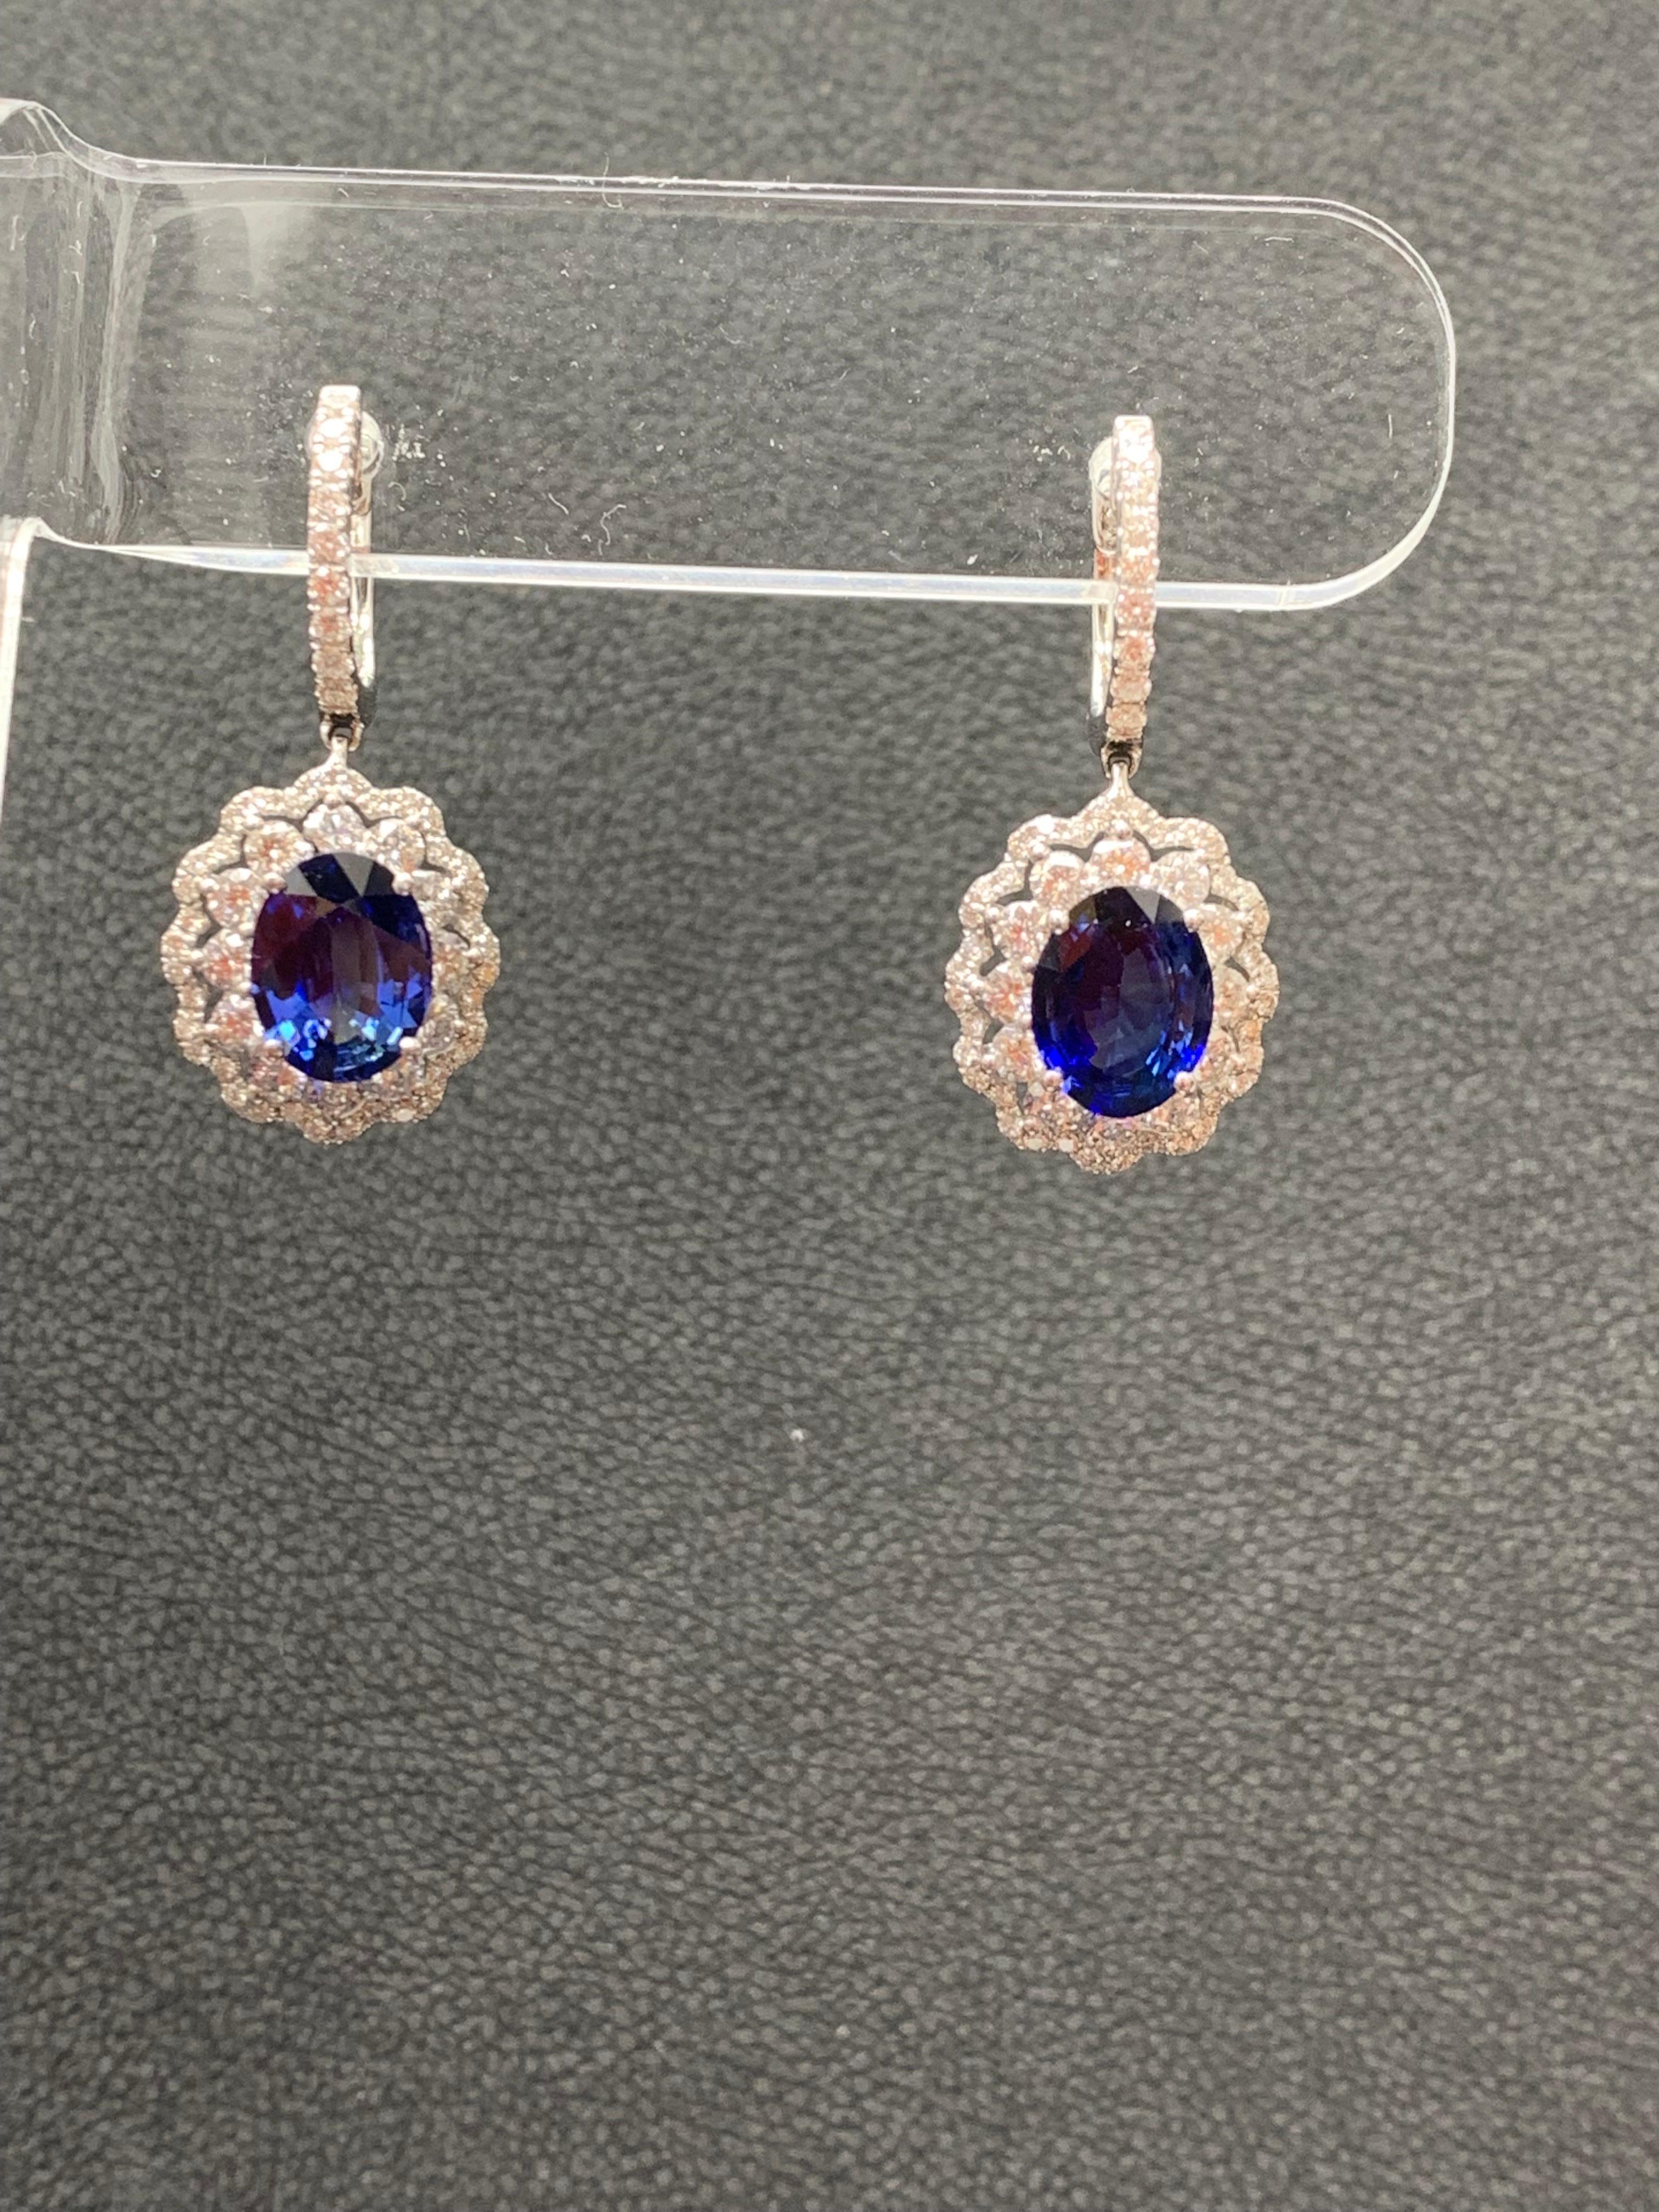 Modern 3.56 Carat Oval Cut Sapphire and Diamond Drop Earrings in 18K White Gold For Sale